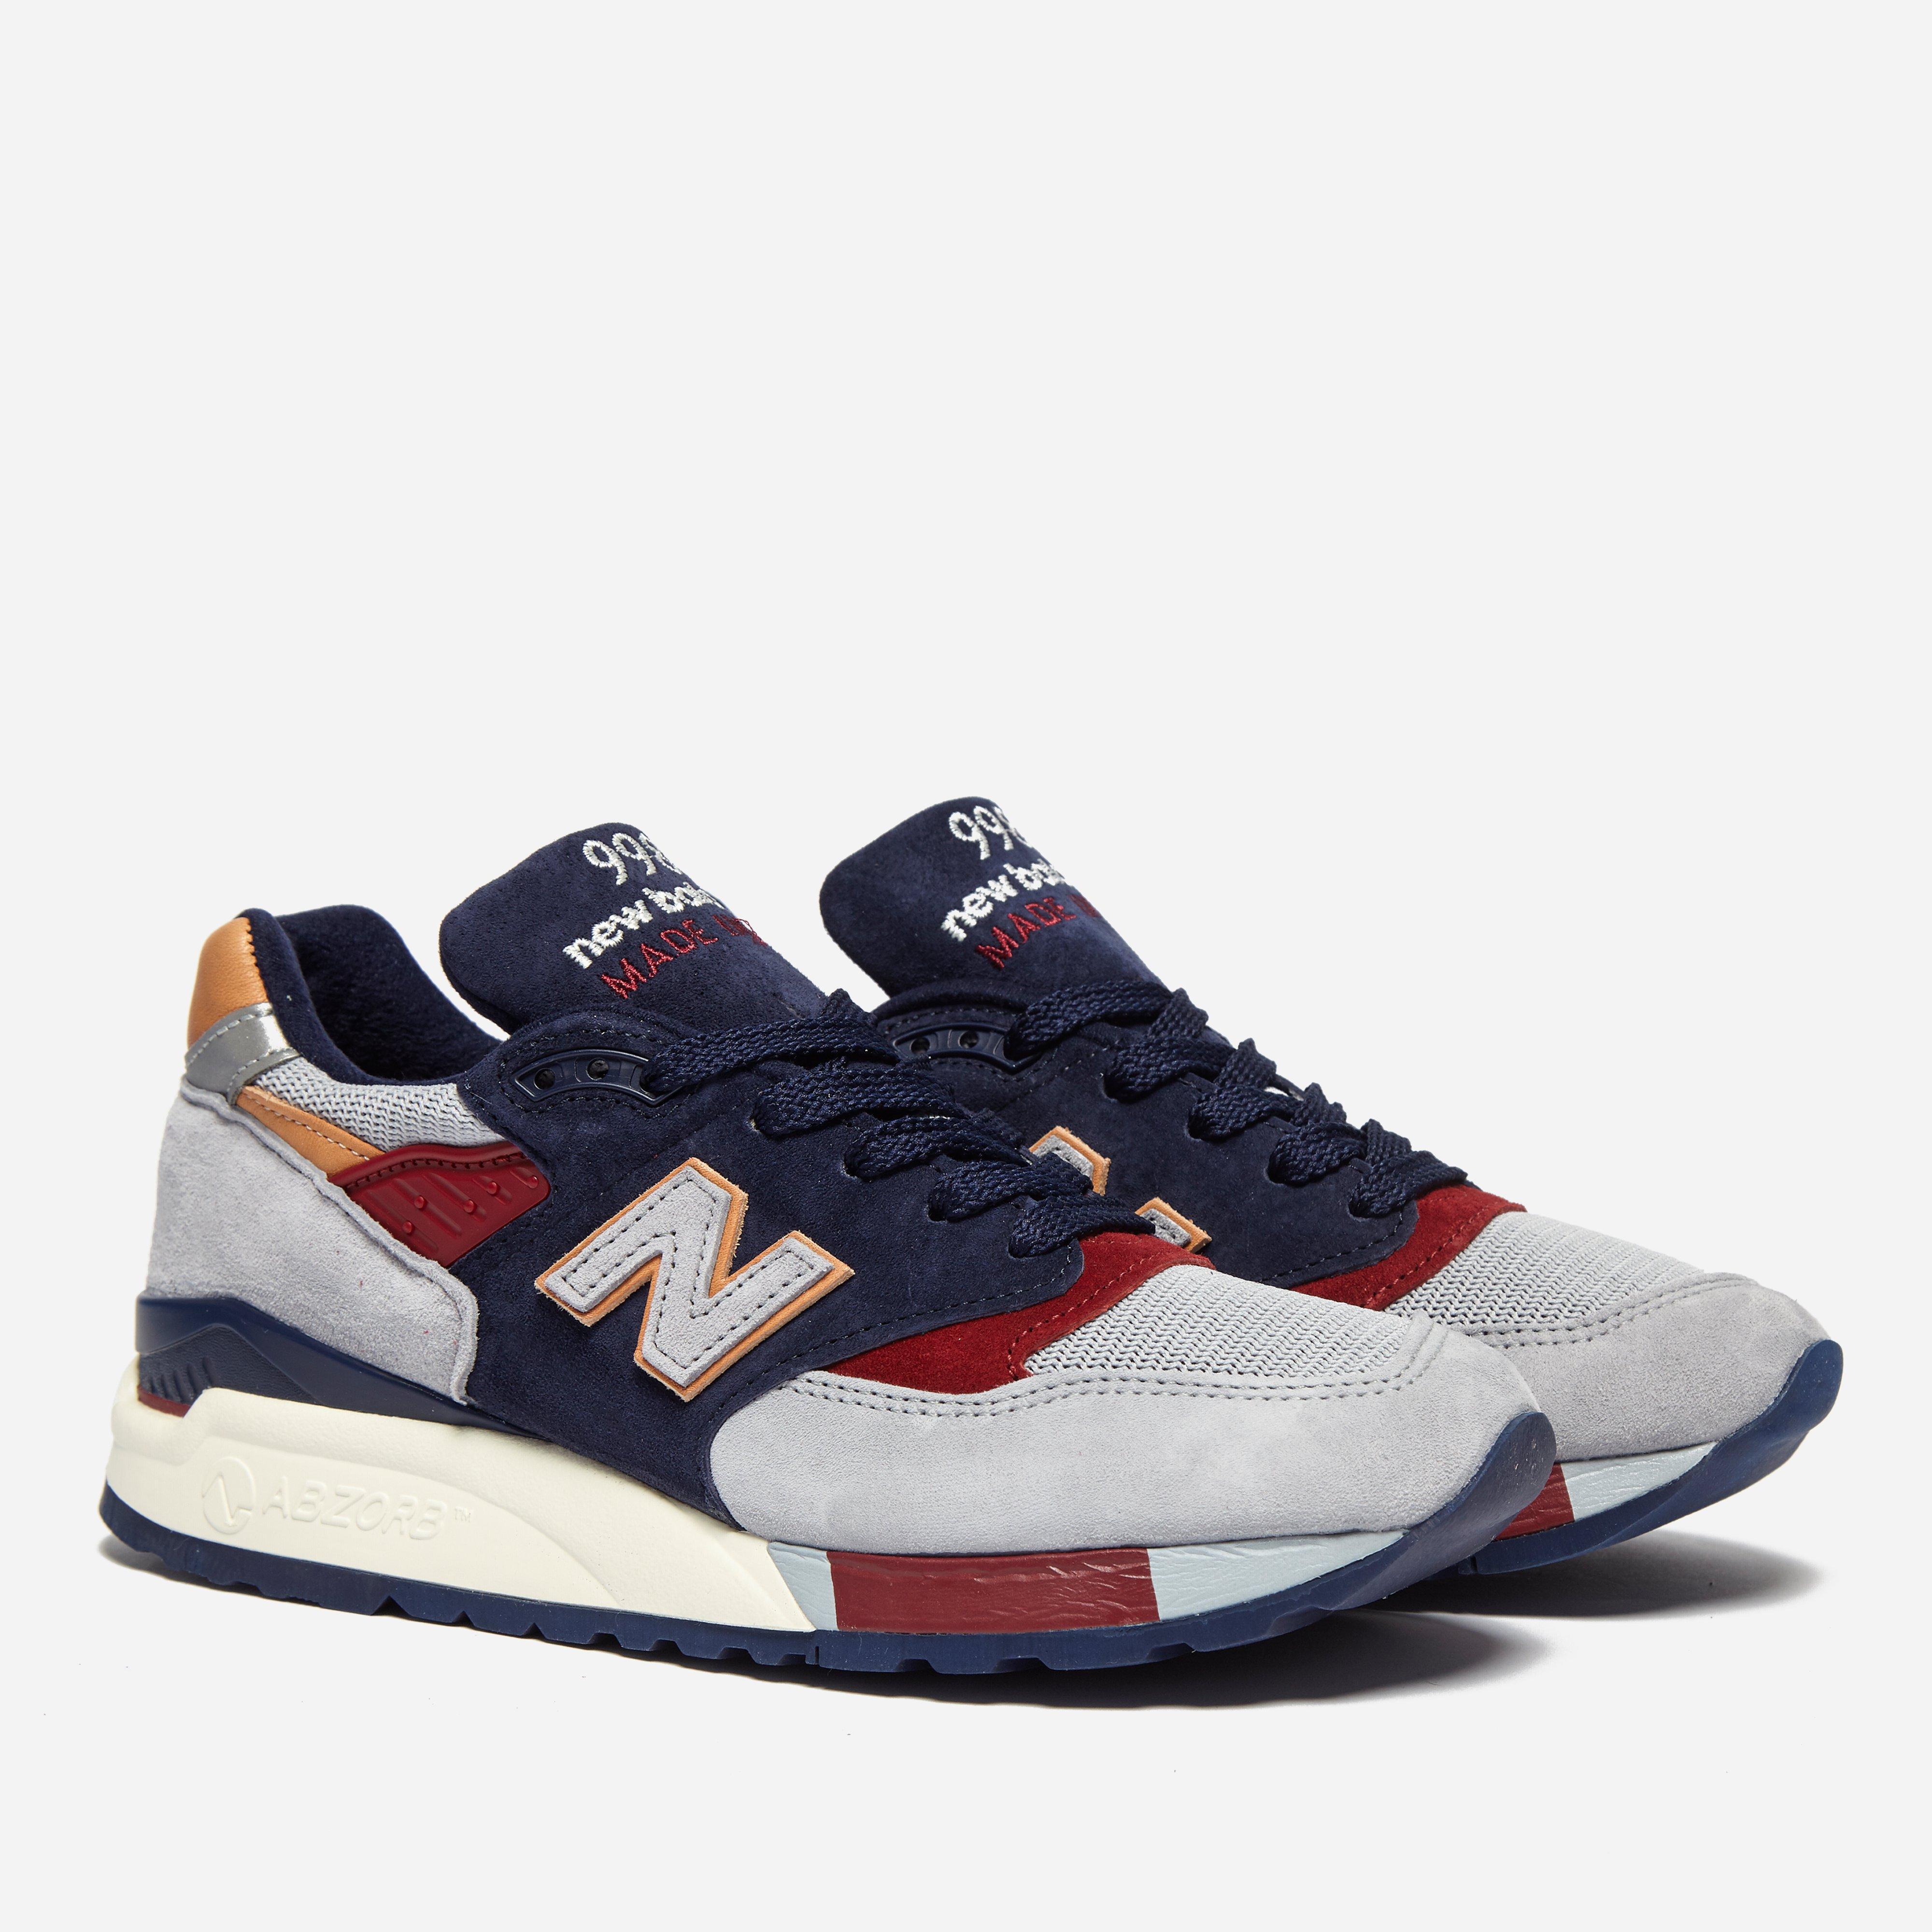 New Balance M 998 Csu Made In Usa in Blue for Men - Lyst